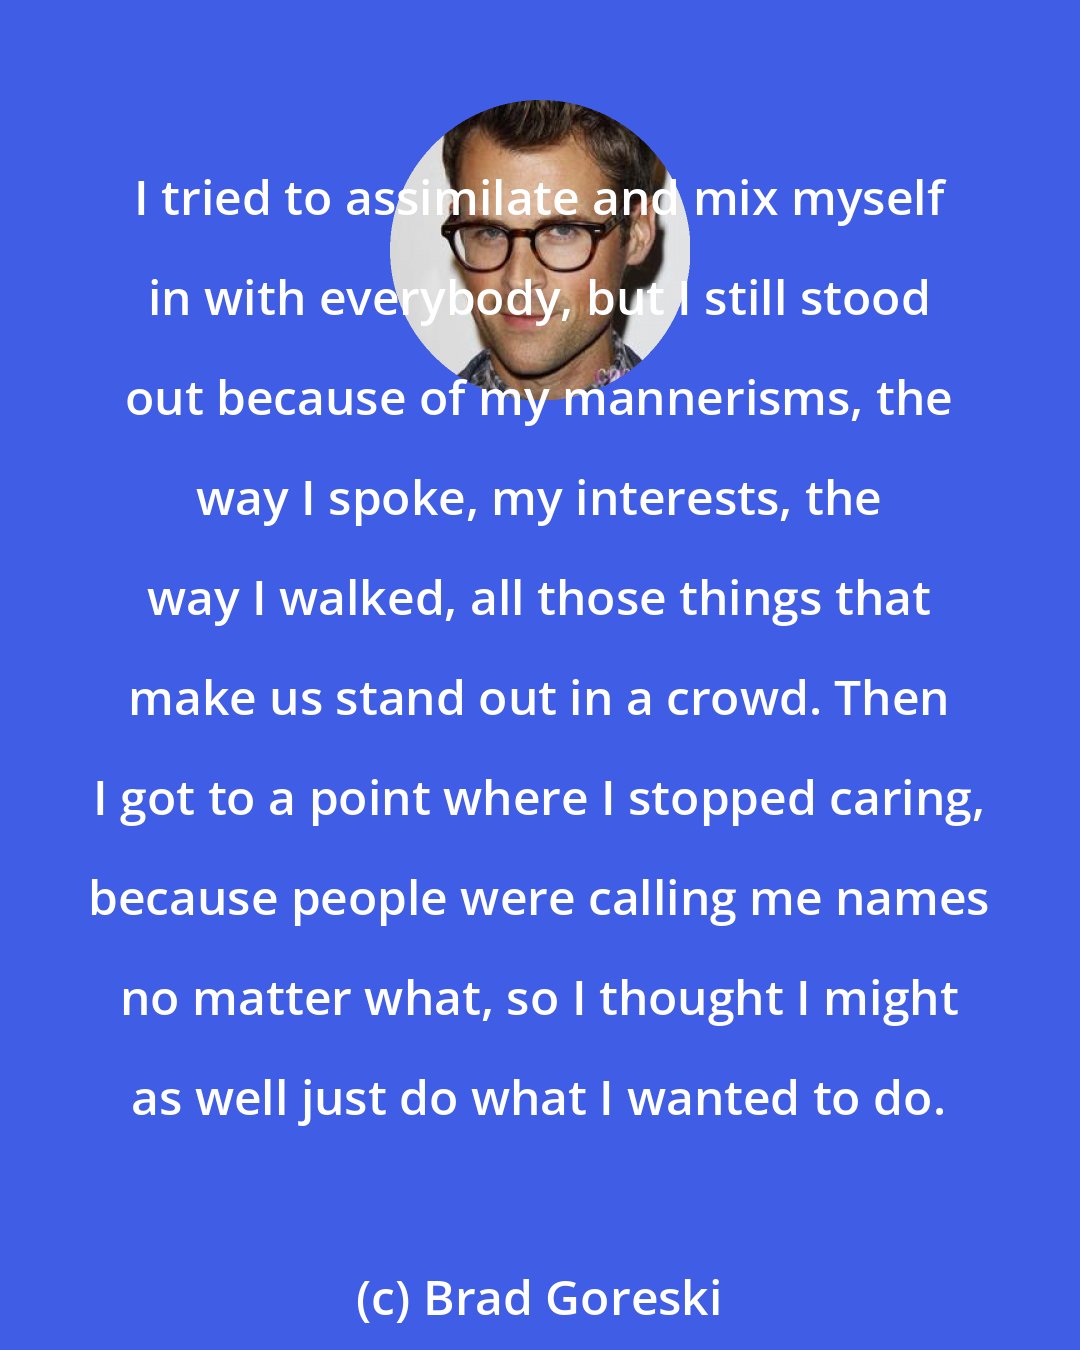 Brad Goreski: I tried to assimilate and mix myself in with everybody, but I still stood out because of my mannerisms, the way I spoke, my interests, the way I walked, all those things that make us stand out in a crowd. Then I got to a point where I stopped caring, because people were calling me names no matter what, so I thought I might as well just do what I wanted to do.